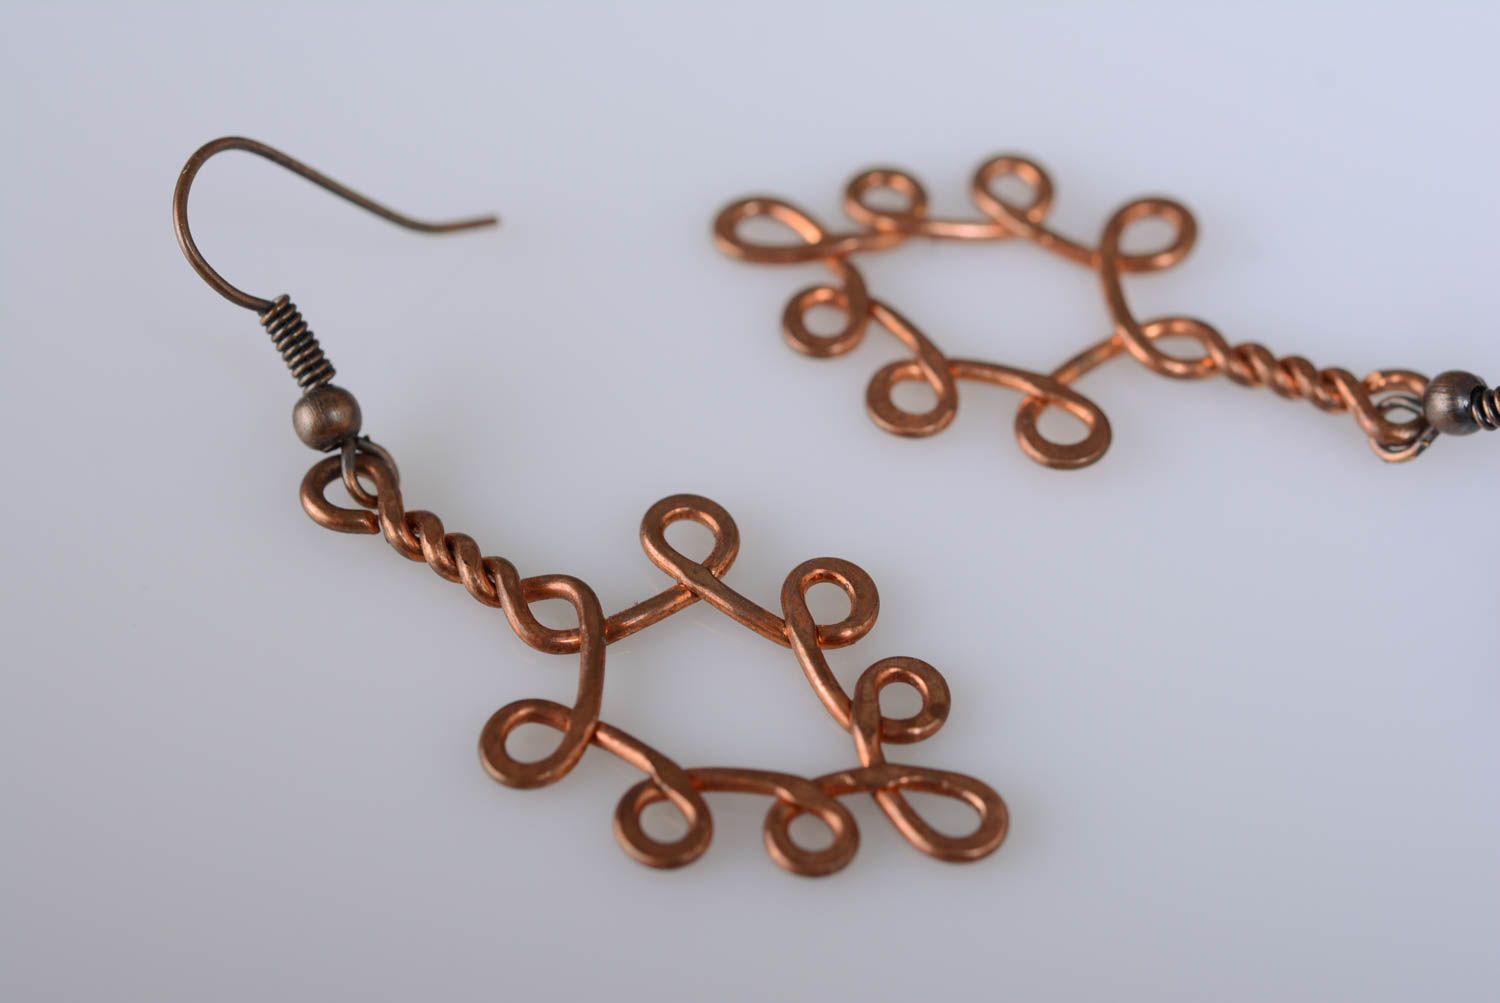 Massive earrings made of copper using wire wrap technique beautiful accessory photo 2